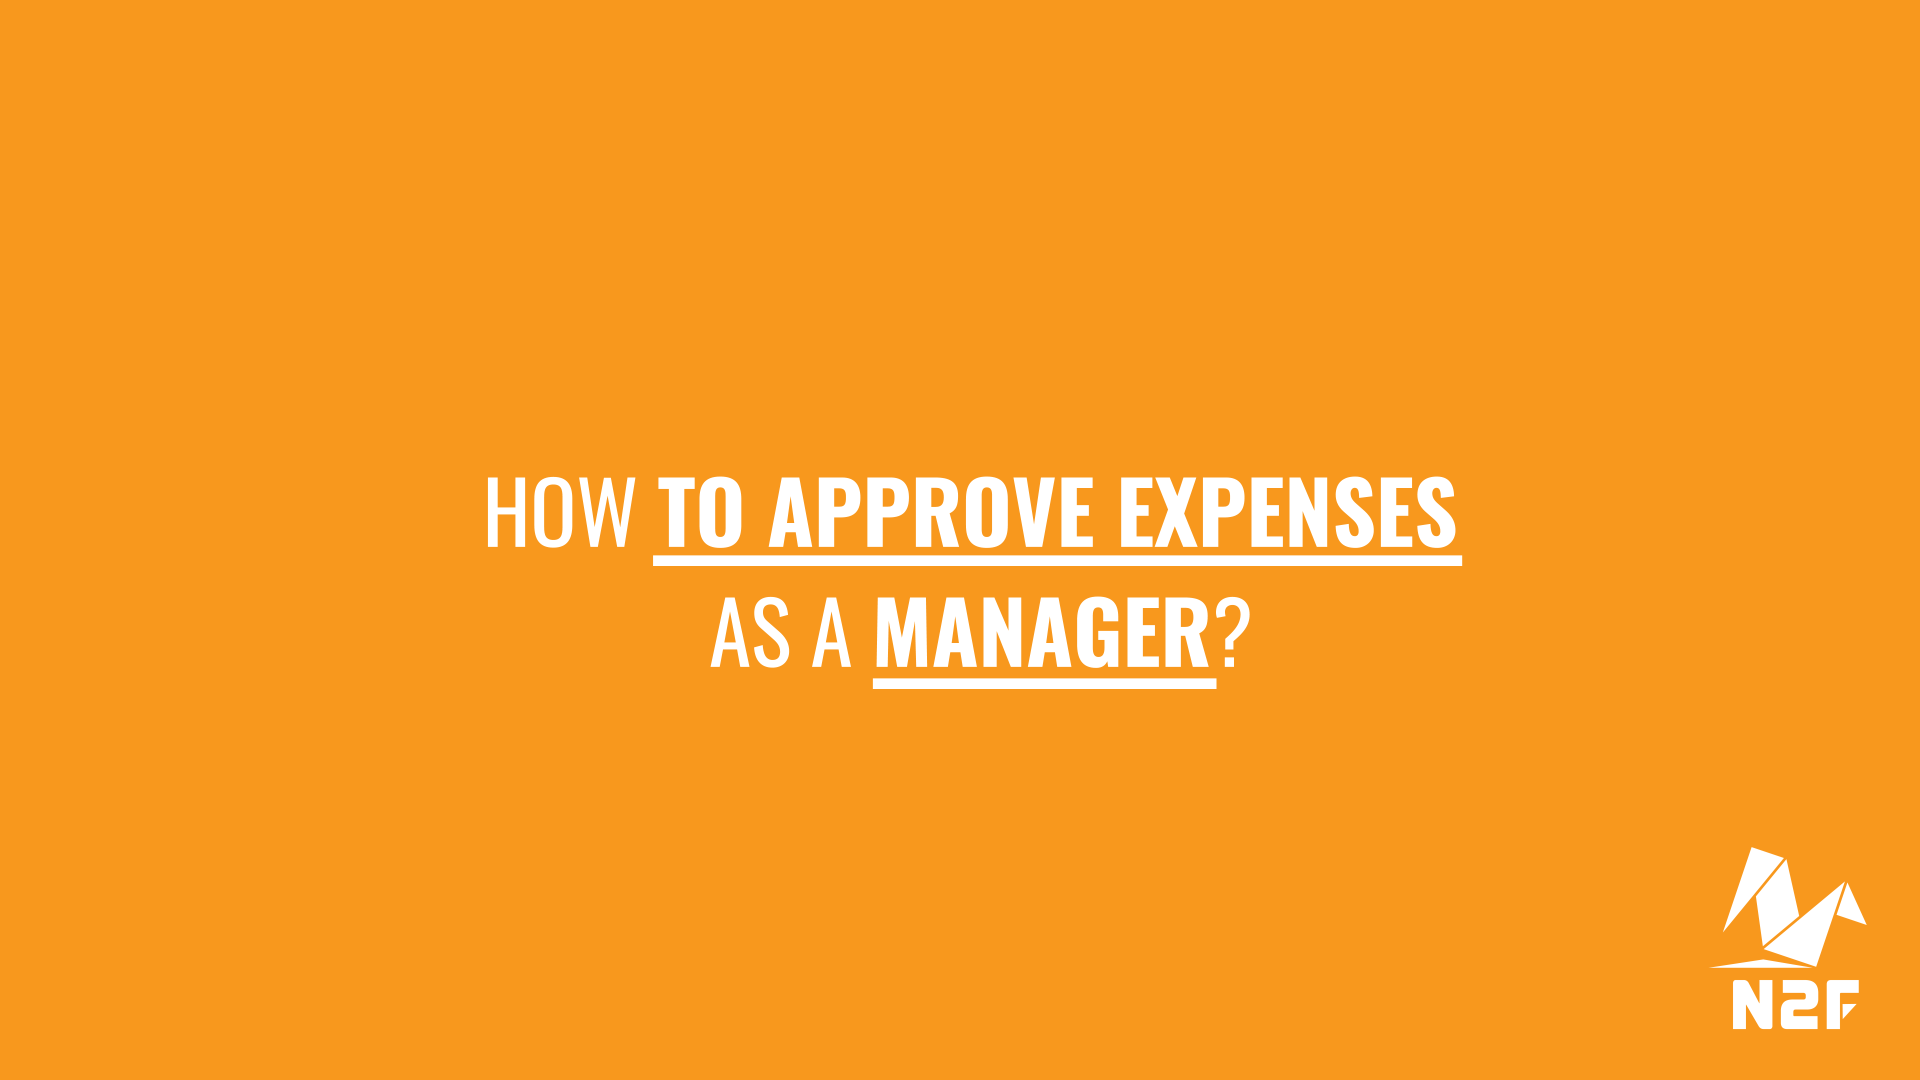 How to approve expenses as a manager?